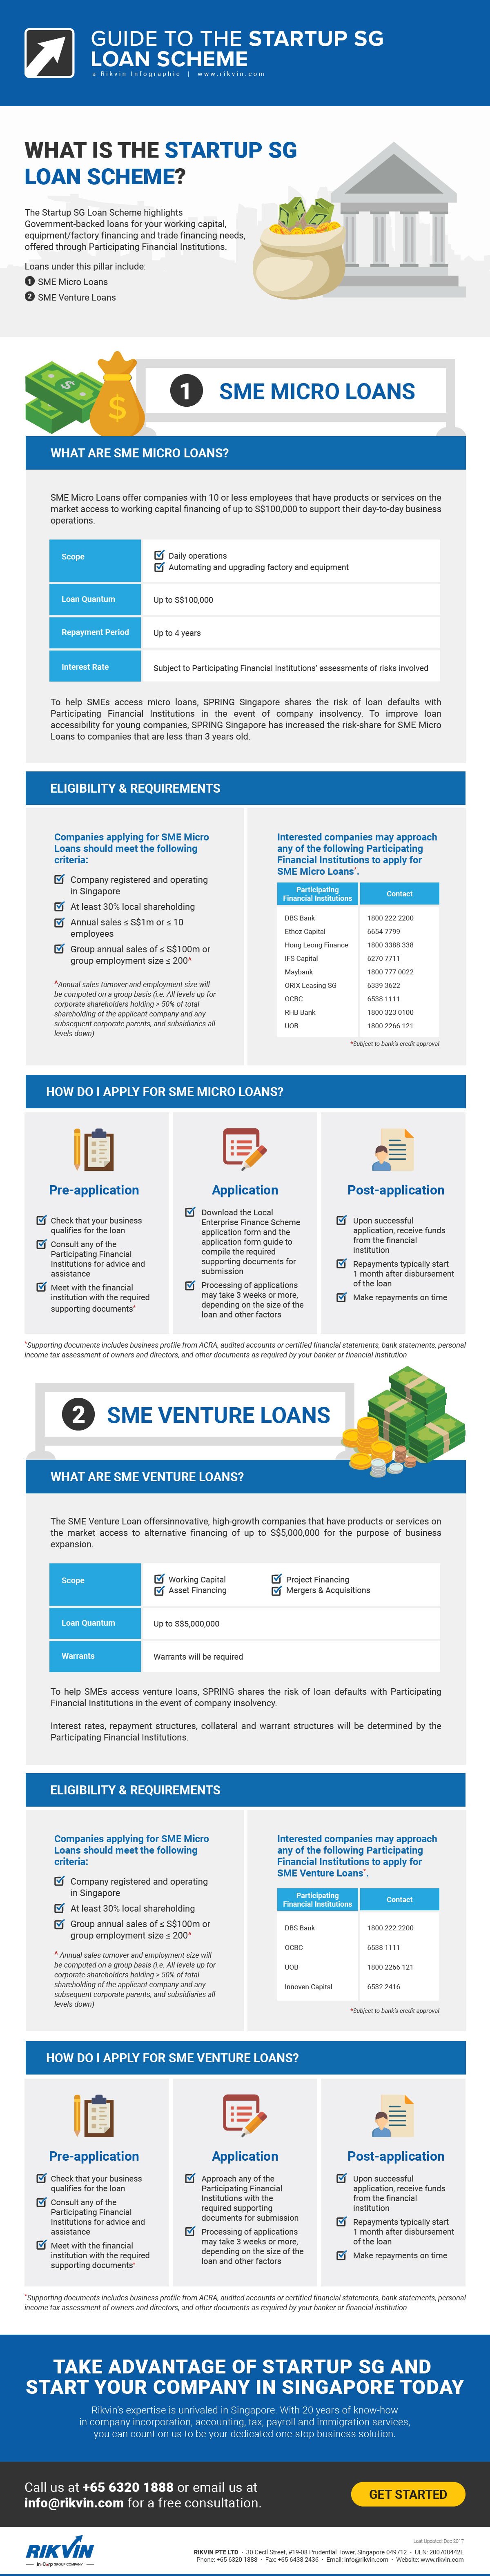 guide to the startup sg loan scheme